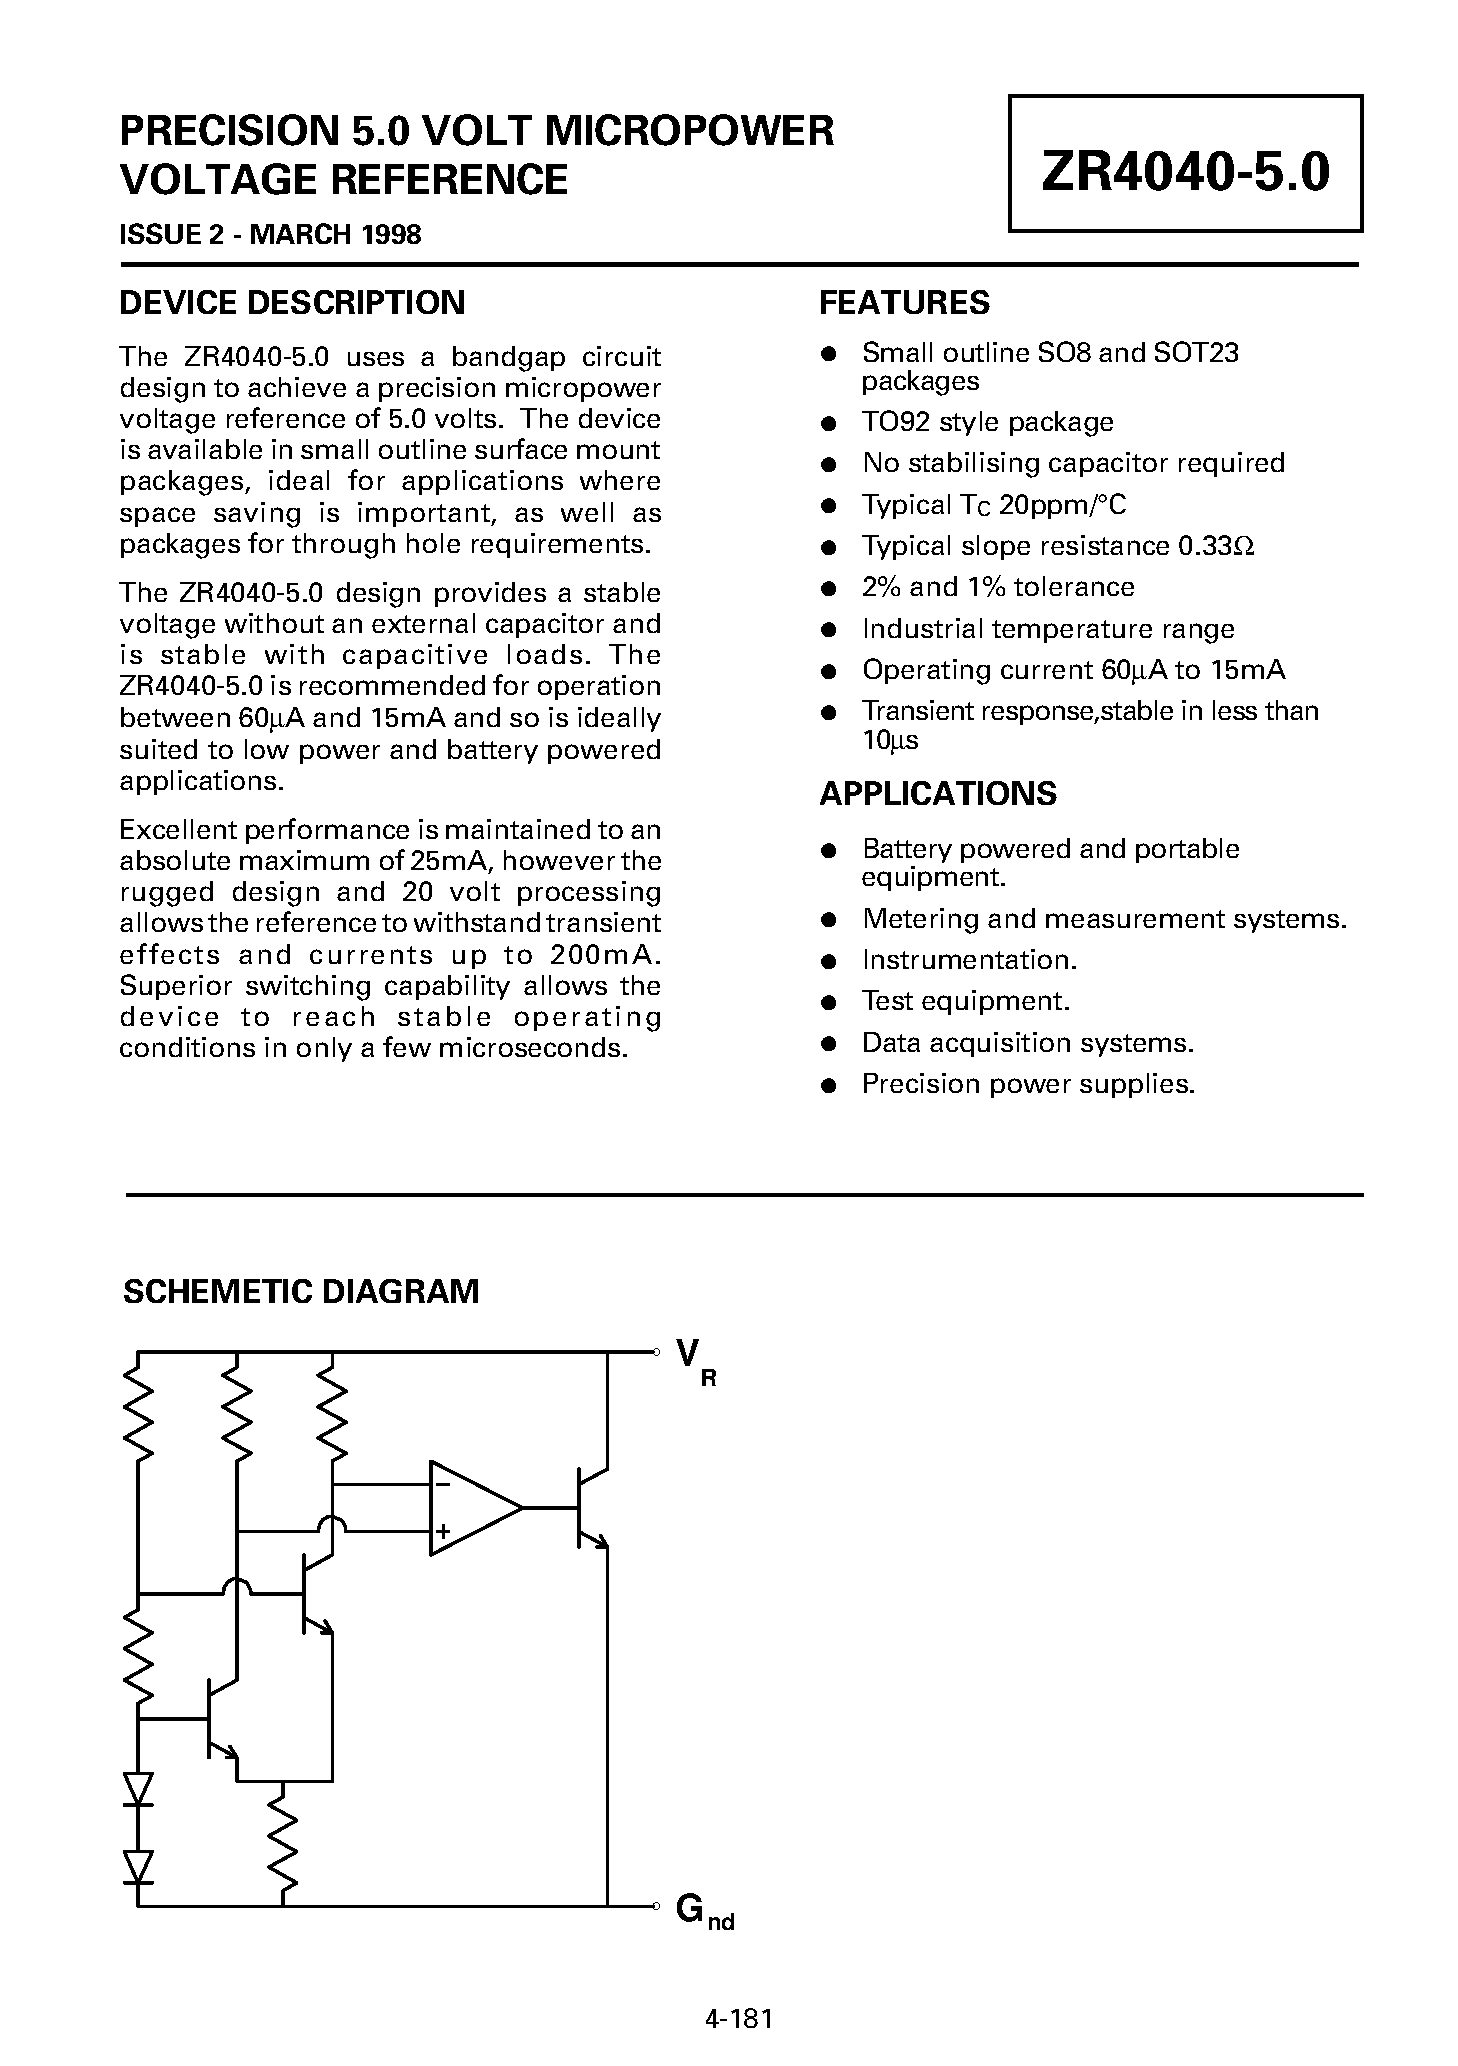 Datasheet ZR40401R50 - PRECISION 5.0 VOLT MICROPOWER VOLTAGE REFERENCE page 1